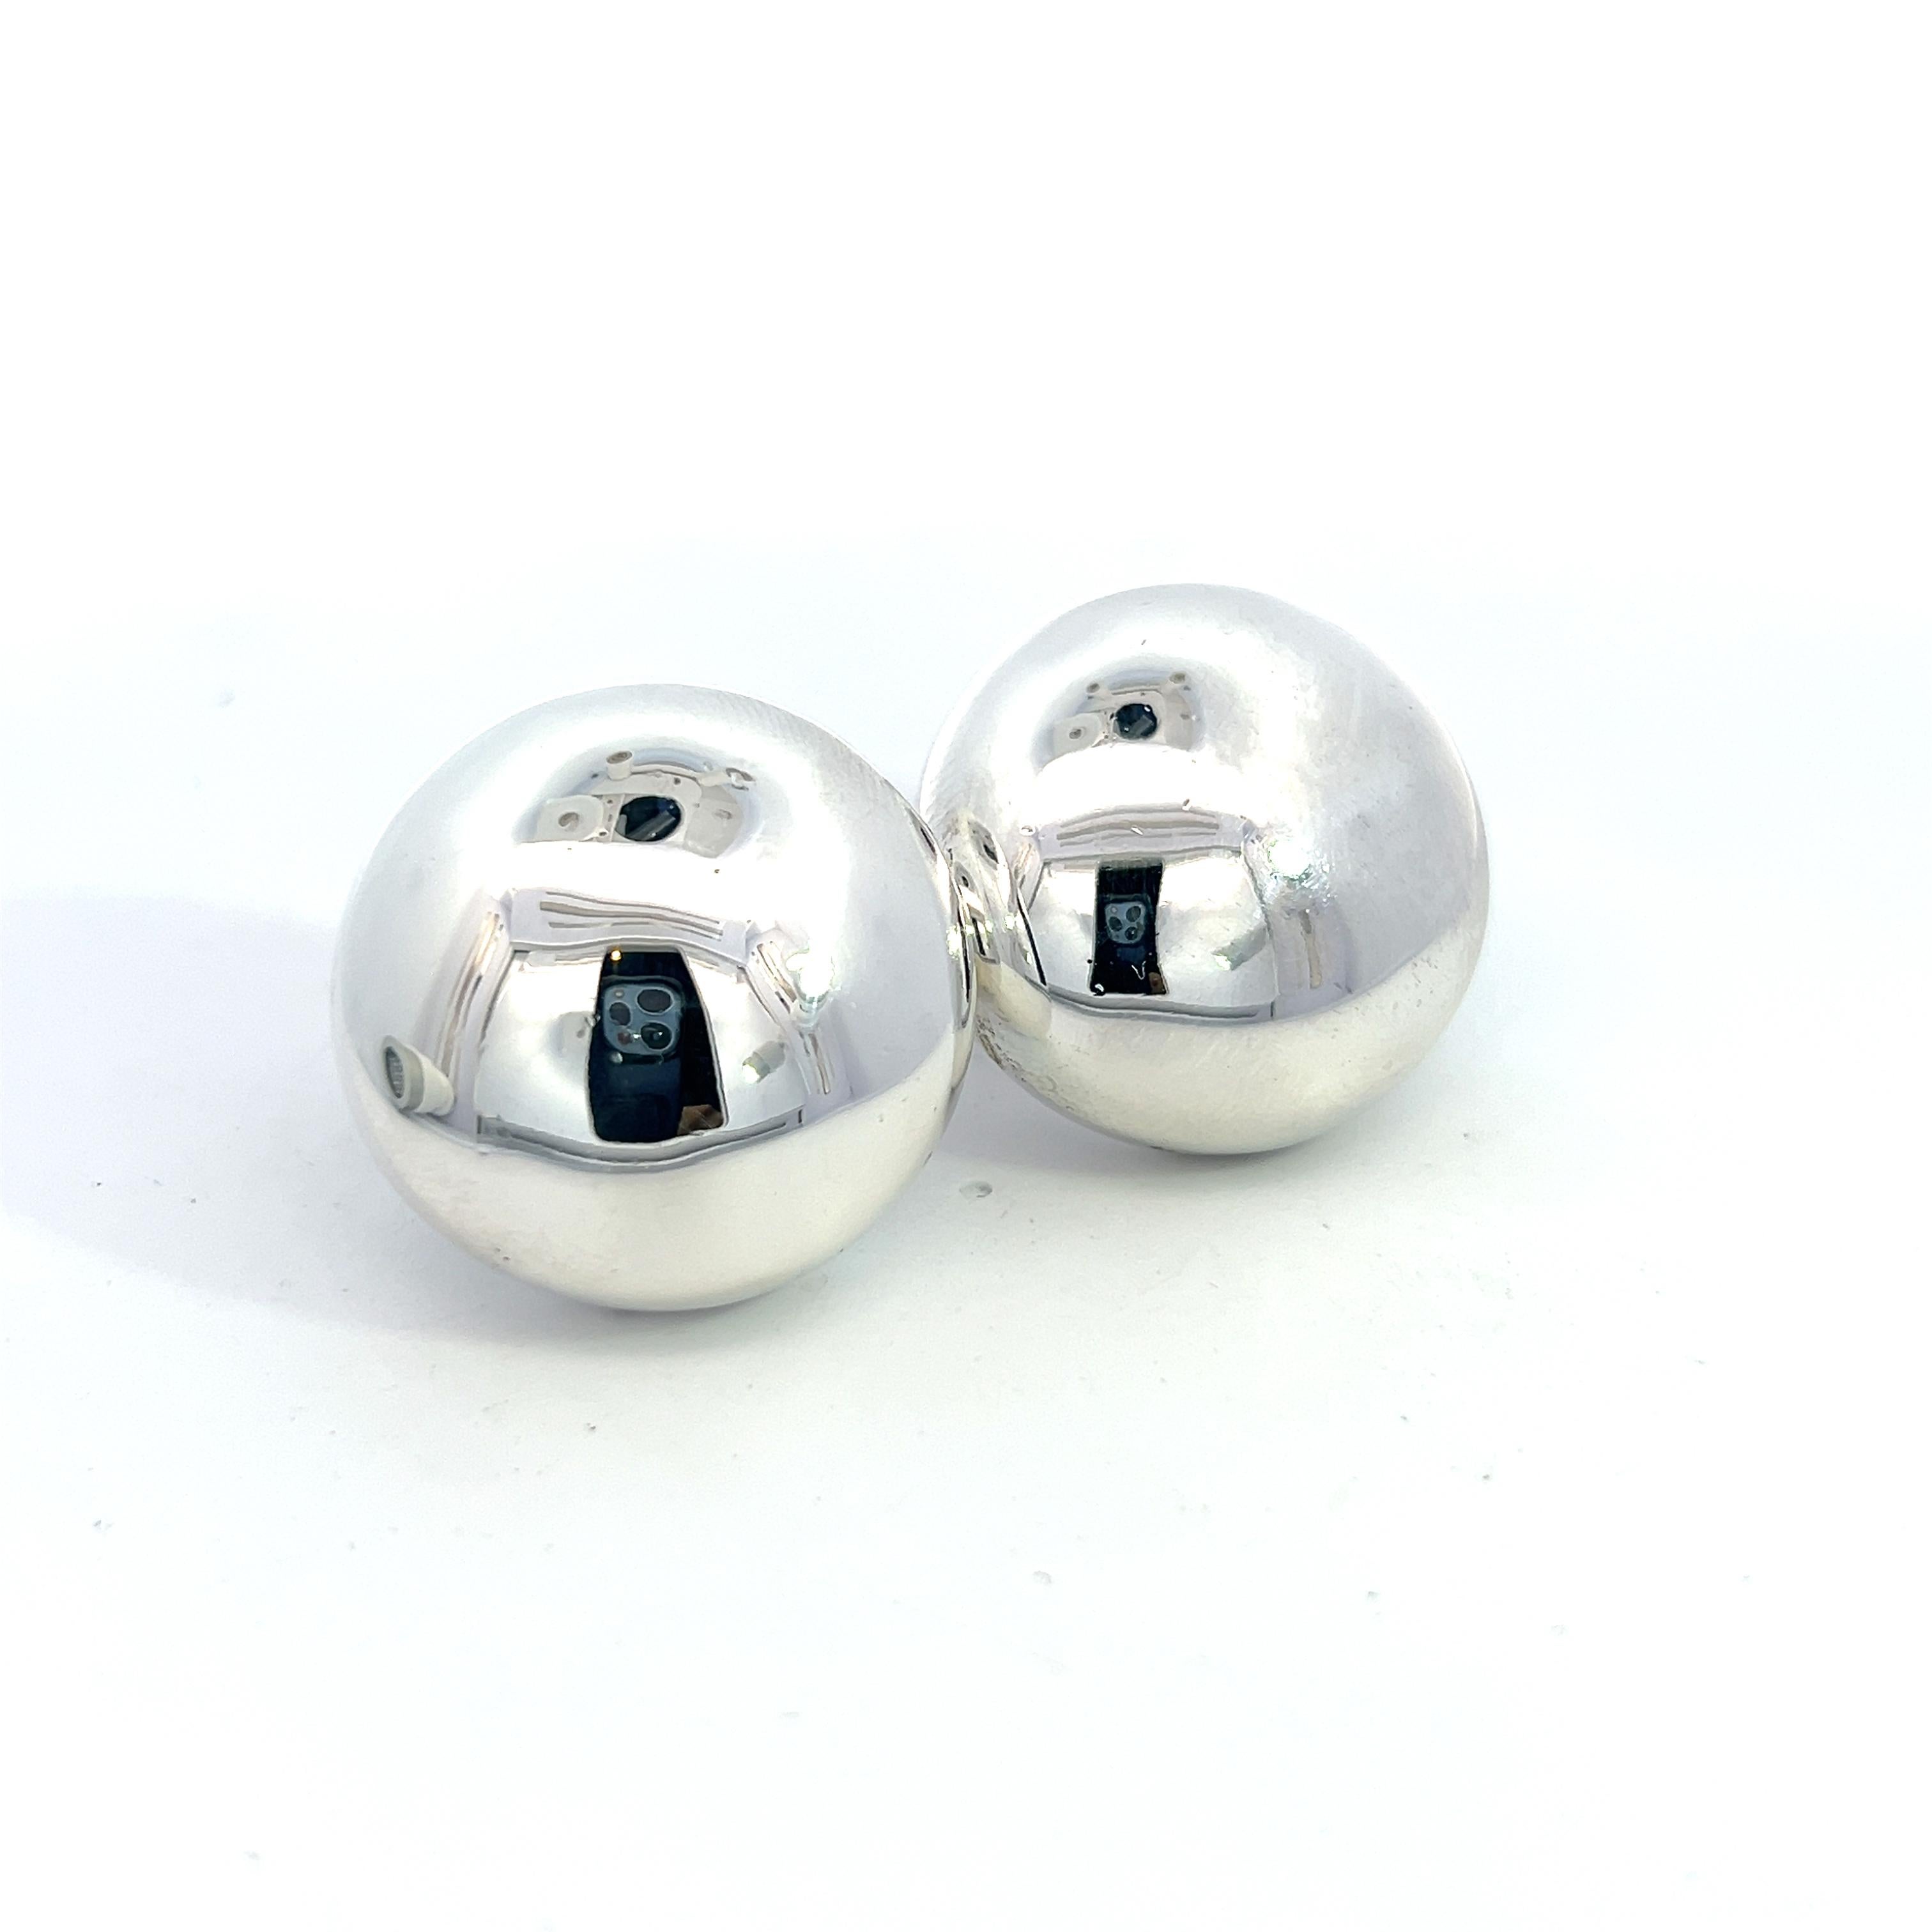 Authentic Tiffany & Co Estate Round Puffed Clip-on Earrings Sterling Silver TIF646

TRUSTED SELLER SINCE 2002

PLEASE SEE OUR HUNDREDS OF POSITIVE FEEDBACKS FROM OUR CLIENTS!!

FREE SHIPPING
Style: Puffed Clip-on Earrings
Shape: Round
Material: